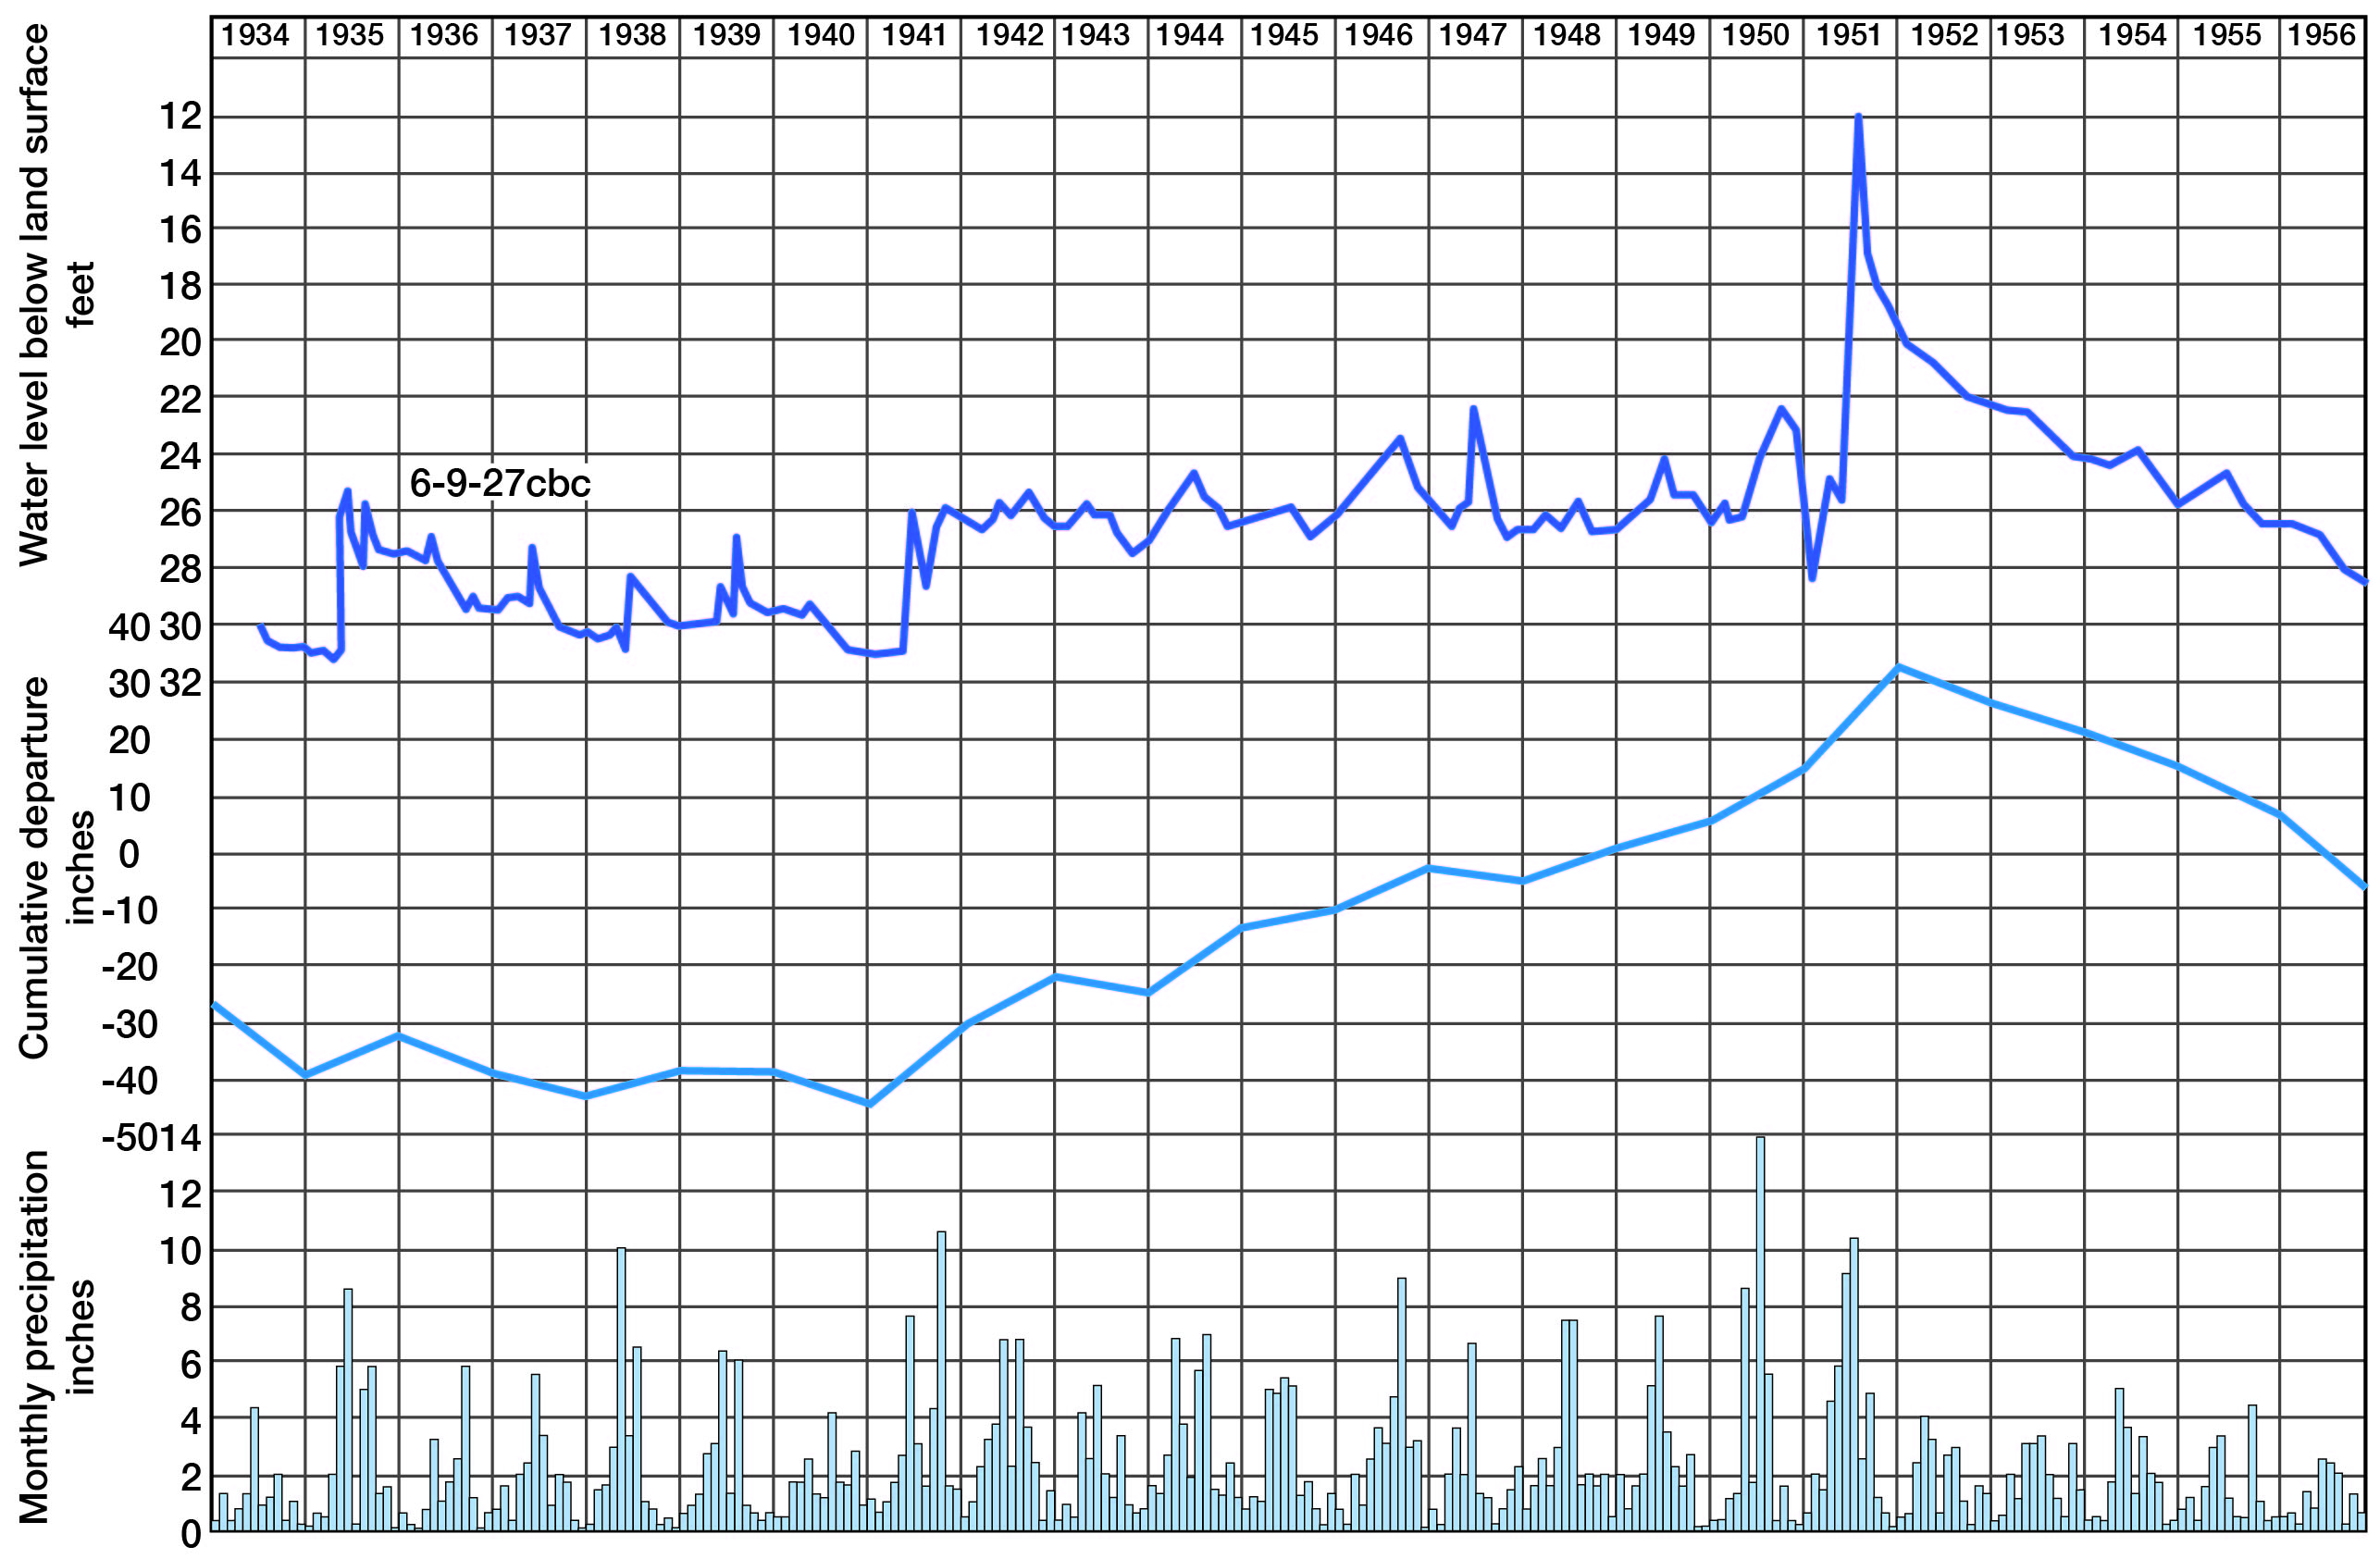 Long term rises and fall of water level in well coincides with long-term precipitation graph.